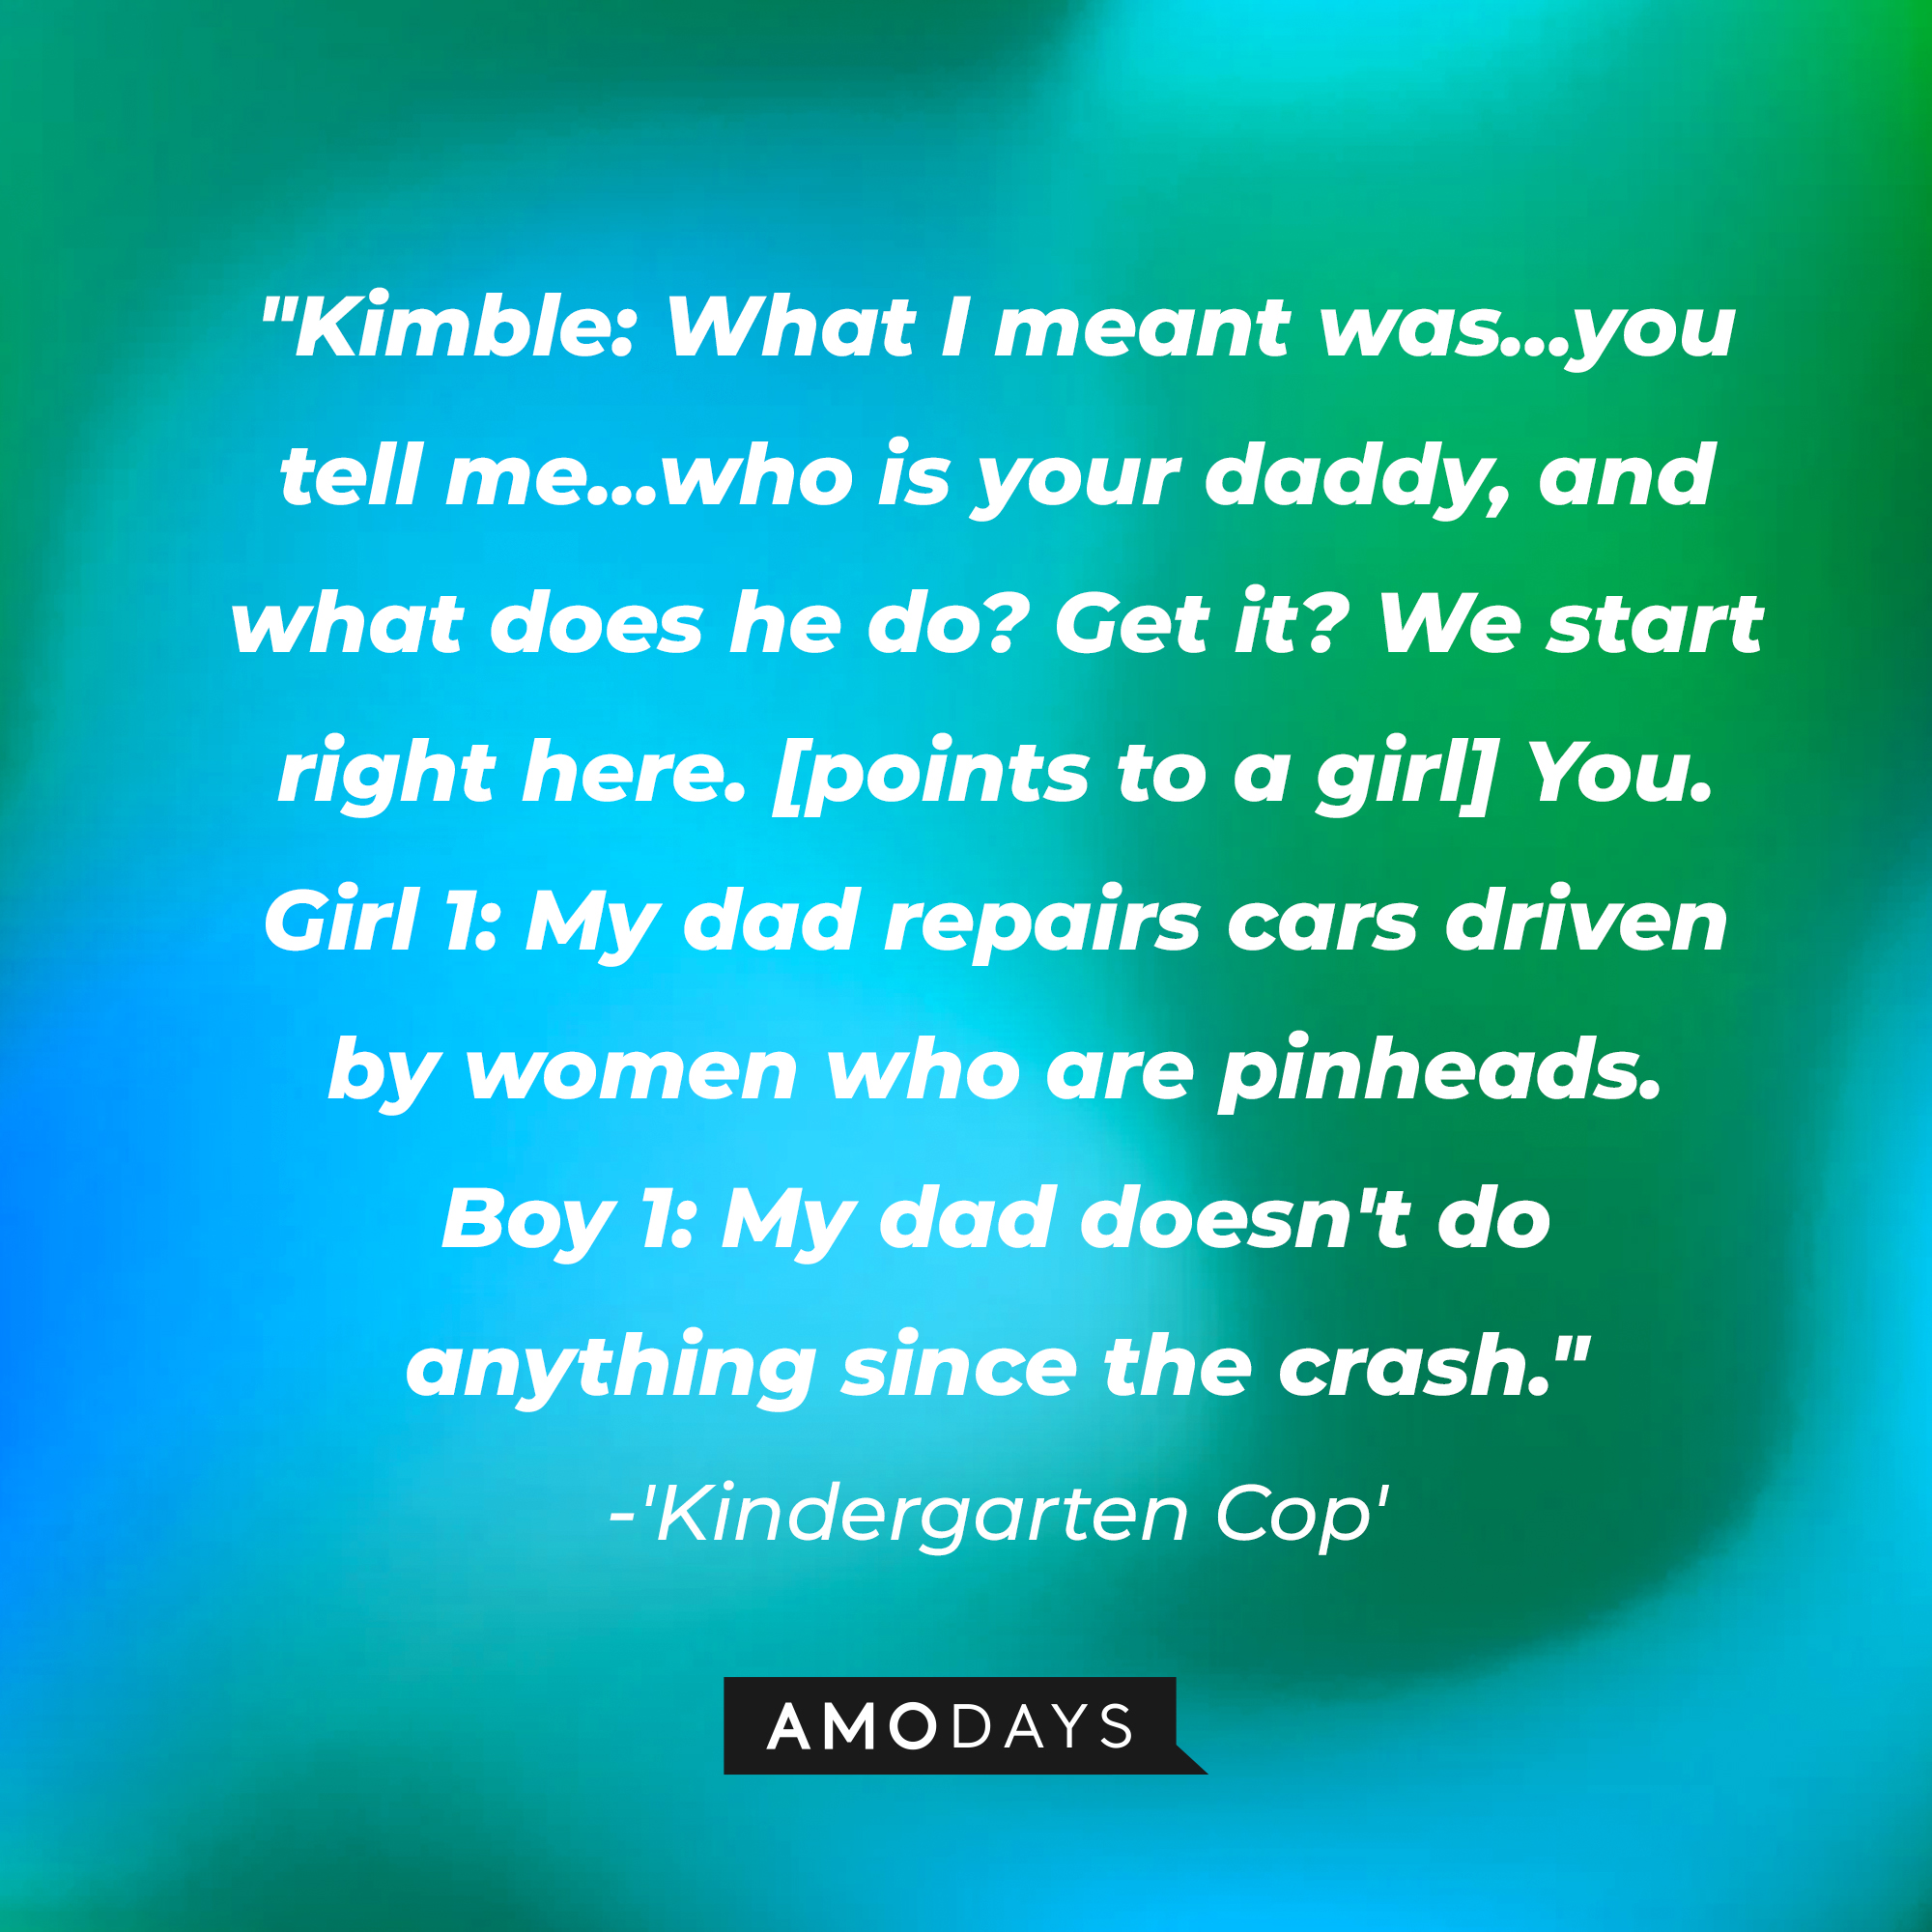 Detective John Kimble's dialogue with students in "Kindergarten Cop:" "Kimble: What I meant was, you tell me who is your daddy, and what does he do? Get it? We start right here. You. ; Girl 1: My dad repairs cars driven by women who are pinheads."  | Source: AmoDays